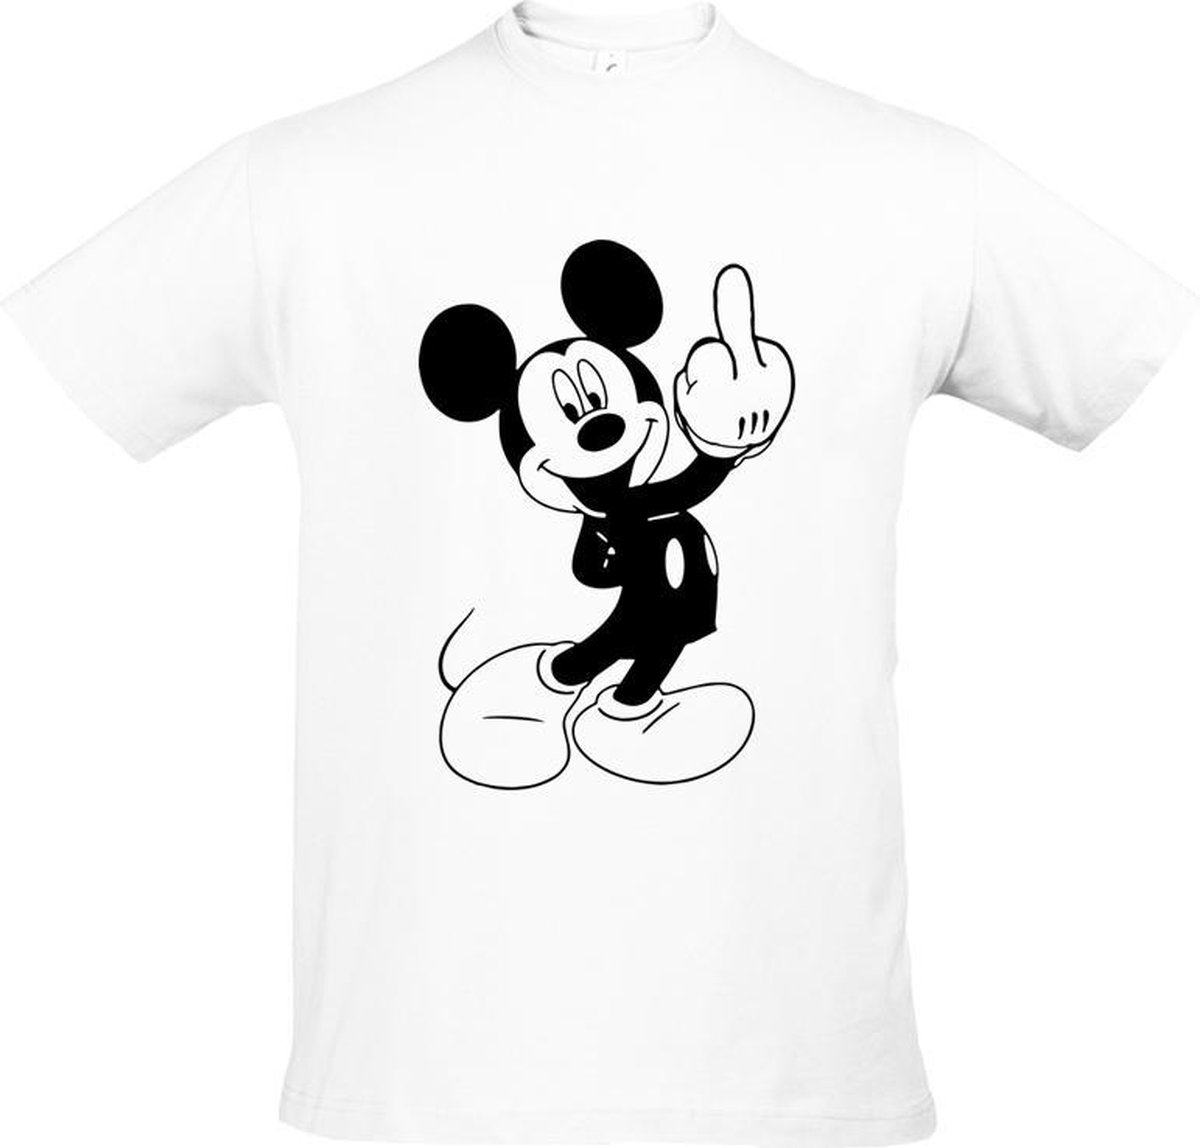 Bc Mickey Mouse - Fuck You - Disney - Tekenfilm - Vandaal - Minnie Mouse - Weed - Rock On Unisex T-shirt S